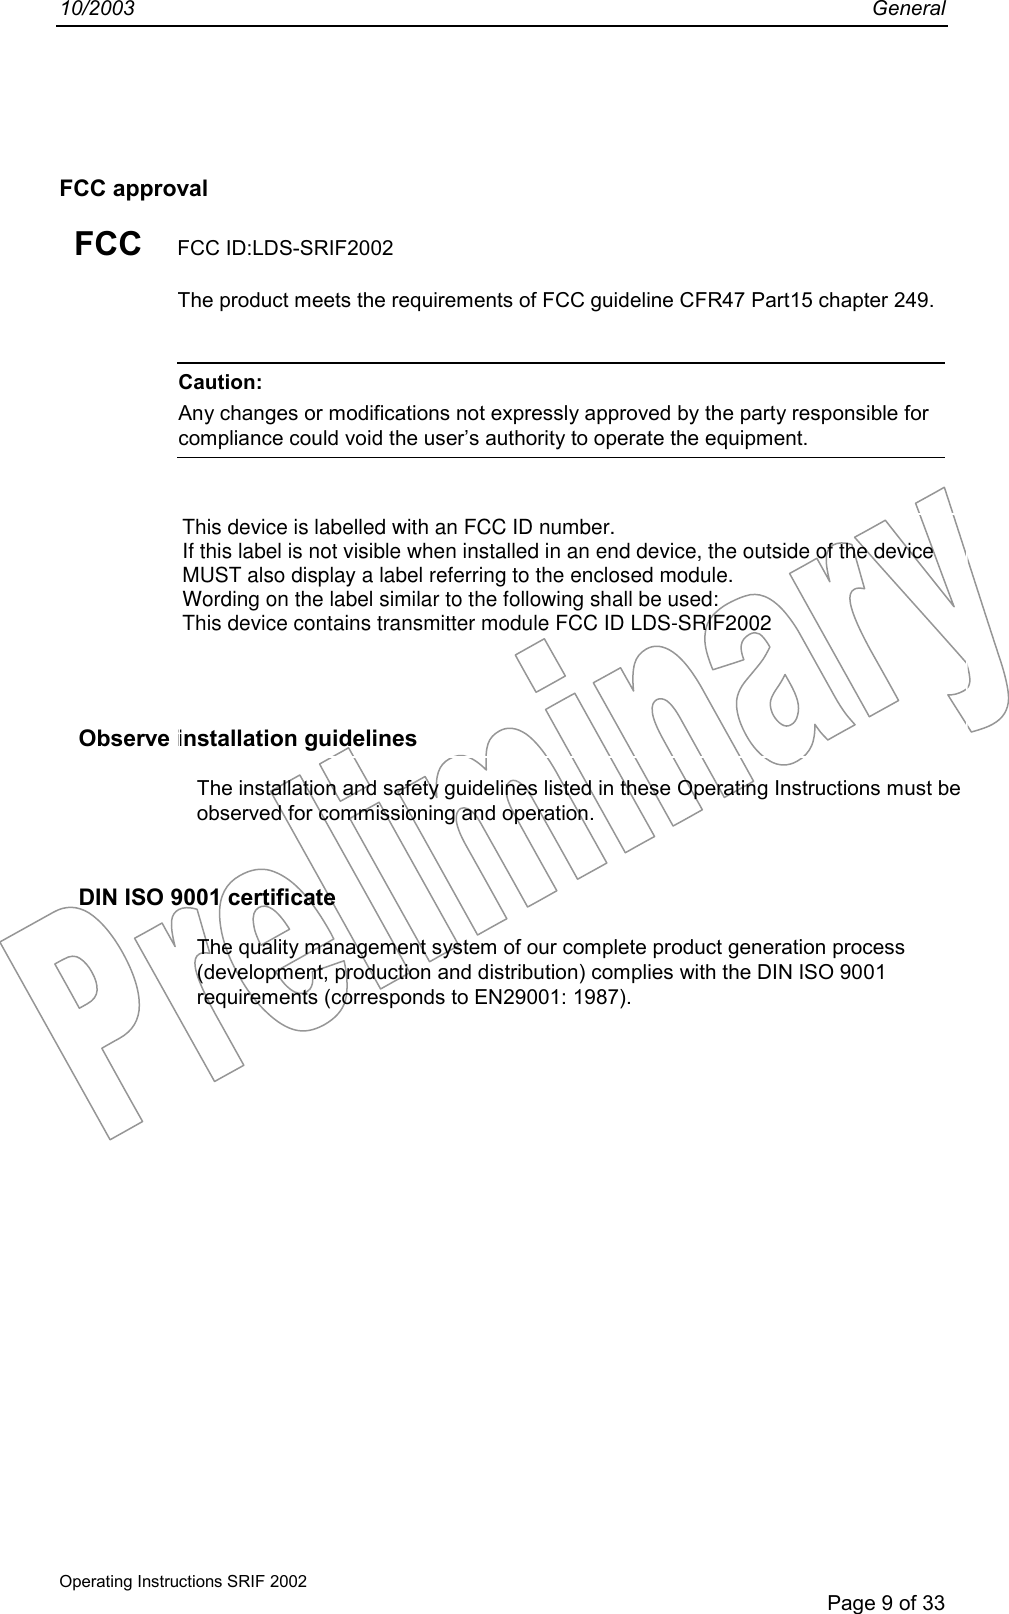 10/2003 GeneralOperating Instructions SRIF 2002Page 9 of 33FCC approvalFCC FCC ID:LDS-SRIF2002The product meets the requirements of FCC guideline CFR47 Part15 chapter 249.Caution:Any changes or modifications not expressly approved by the party responsible forcompliance could void the user’s authority to operate the equipment.Observe installation guidelinesThe installation and safety guidelines listed in these Operating Instructions must beobserved for commissioning and operation.DIN ISO 9001 certificateThe quality management system of our complete product generation process(development, production and distribution) complies with the DIN ISO 9001requirements (corresponds to EN29001: 1987).This device is labelled with an FCC ID number.If this label is not visible when installed in an end device, the outside of the deviceMUST also display a label referring to the enclosed module.Wording on the label similar to the following shall be used:This device contains transmitter module FCC ID LDS-SRIF2002